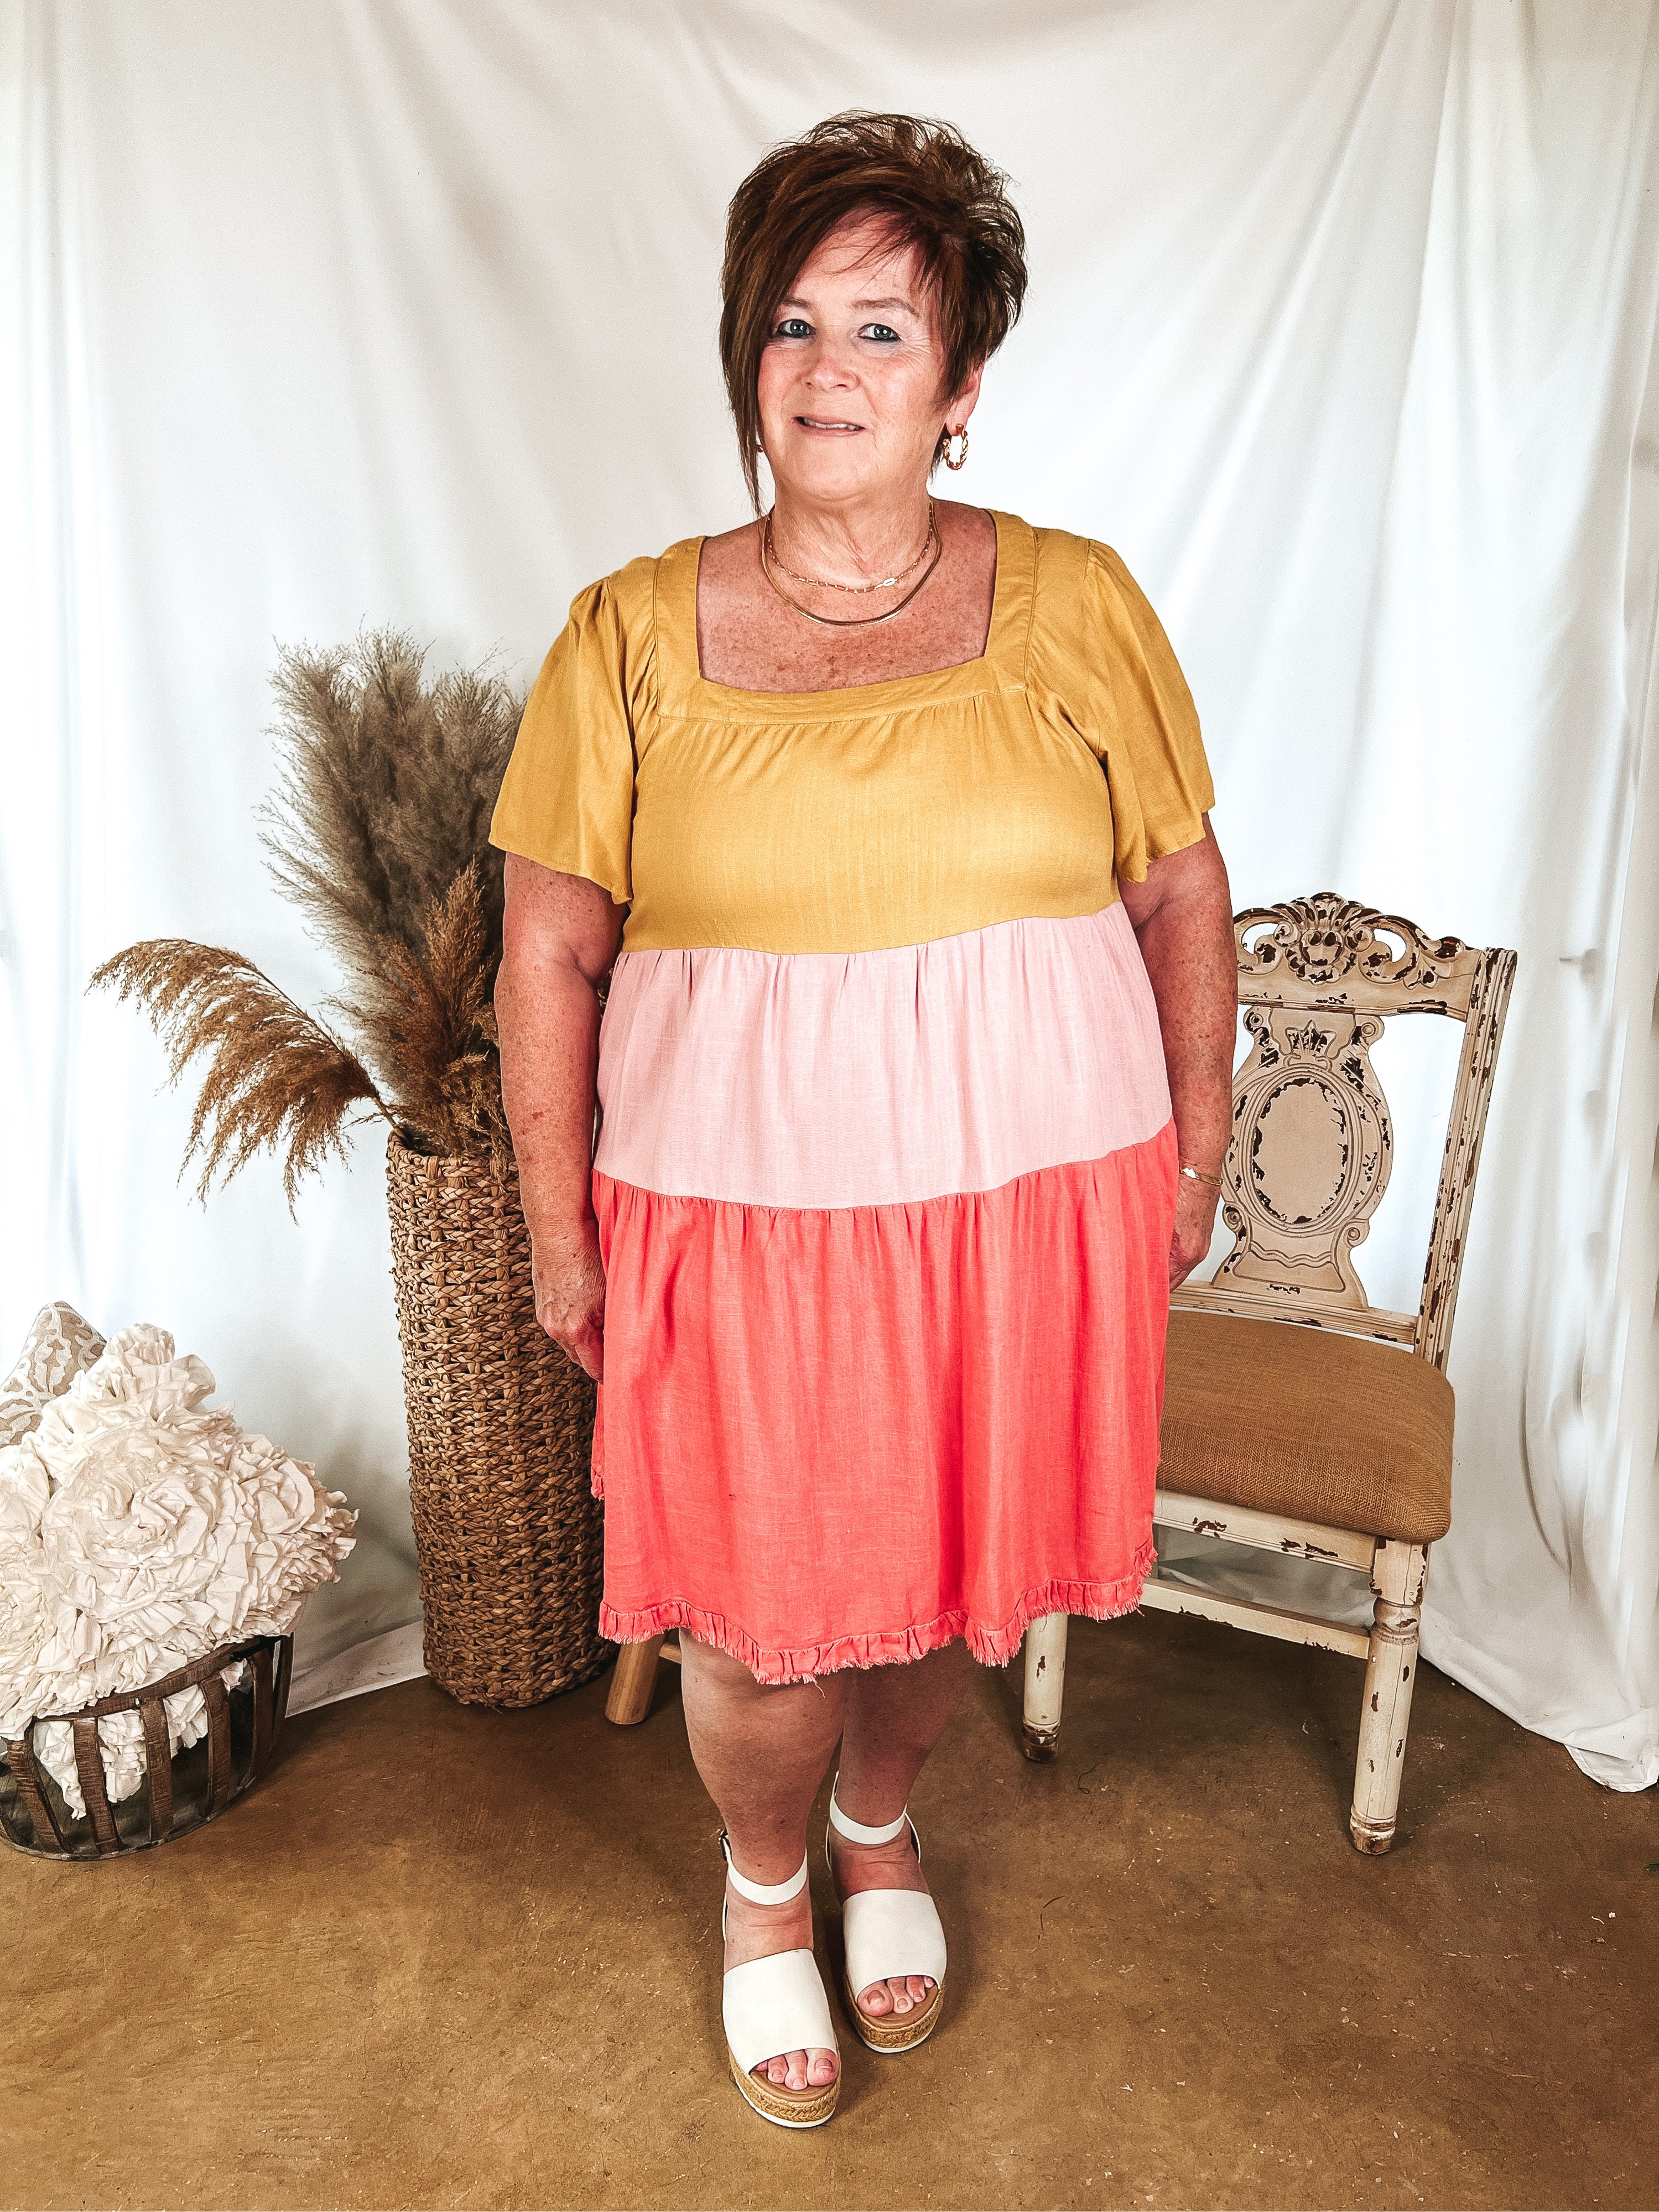 Promised Love Square Neck Color Block Dress in Mustard Yellow and Pink - Giddy Up Glamour Boutique